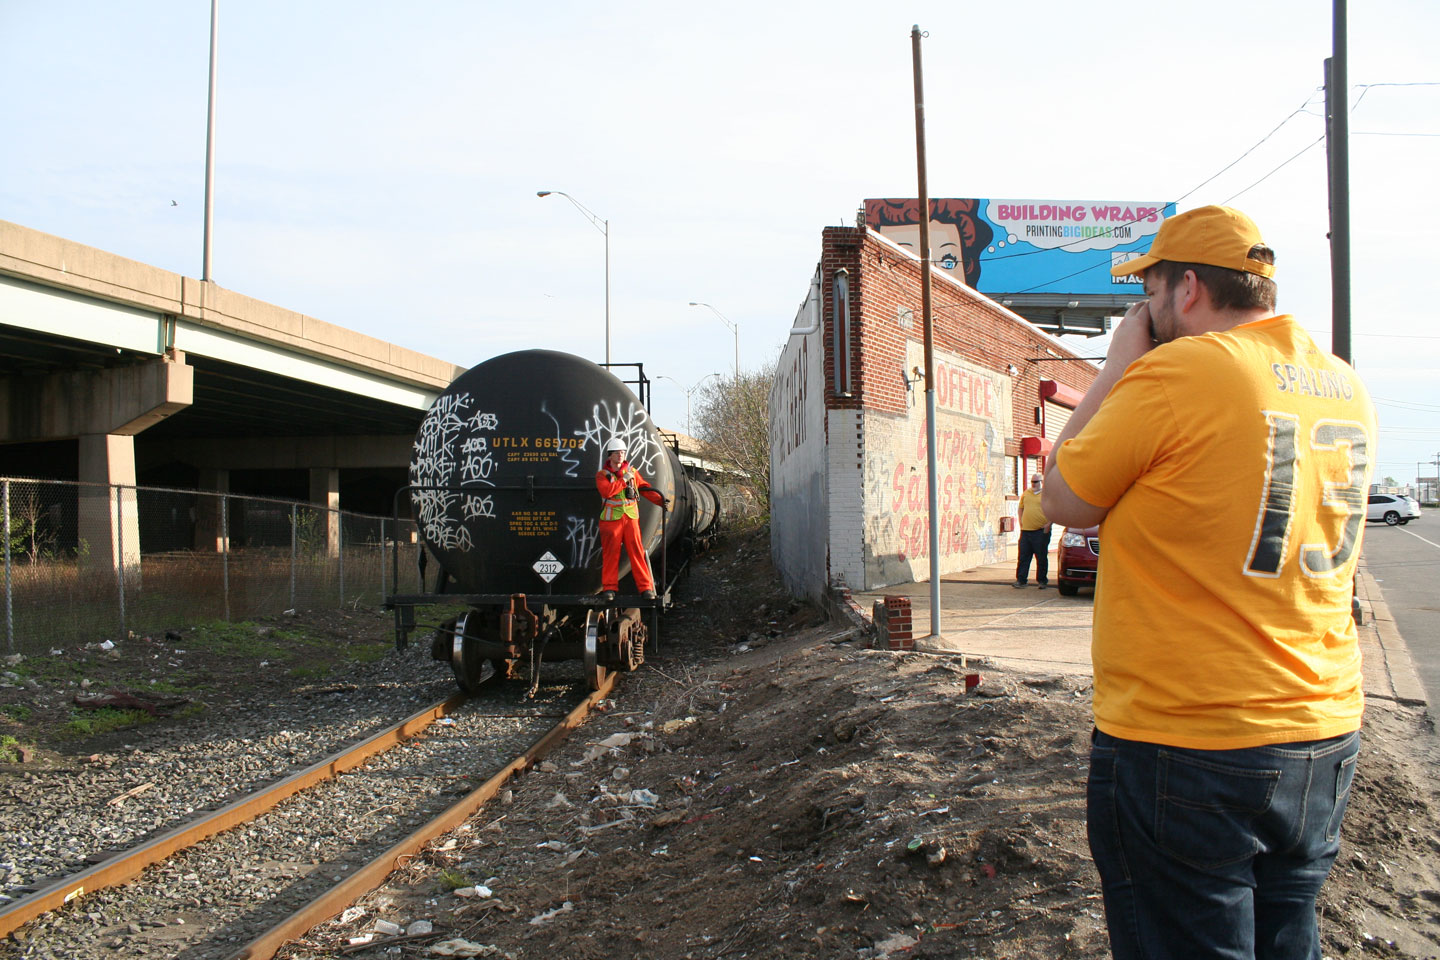 My friend Ben captures the first view of the train, emerging from behind the local businesses.